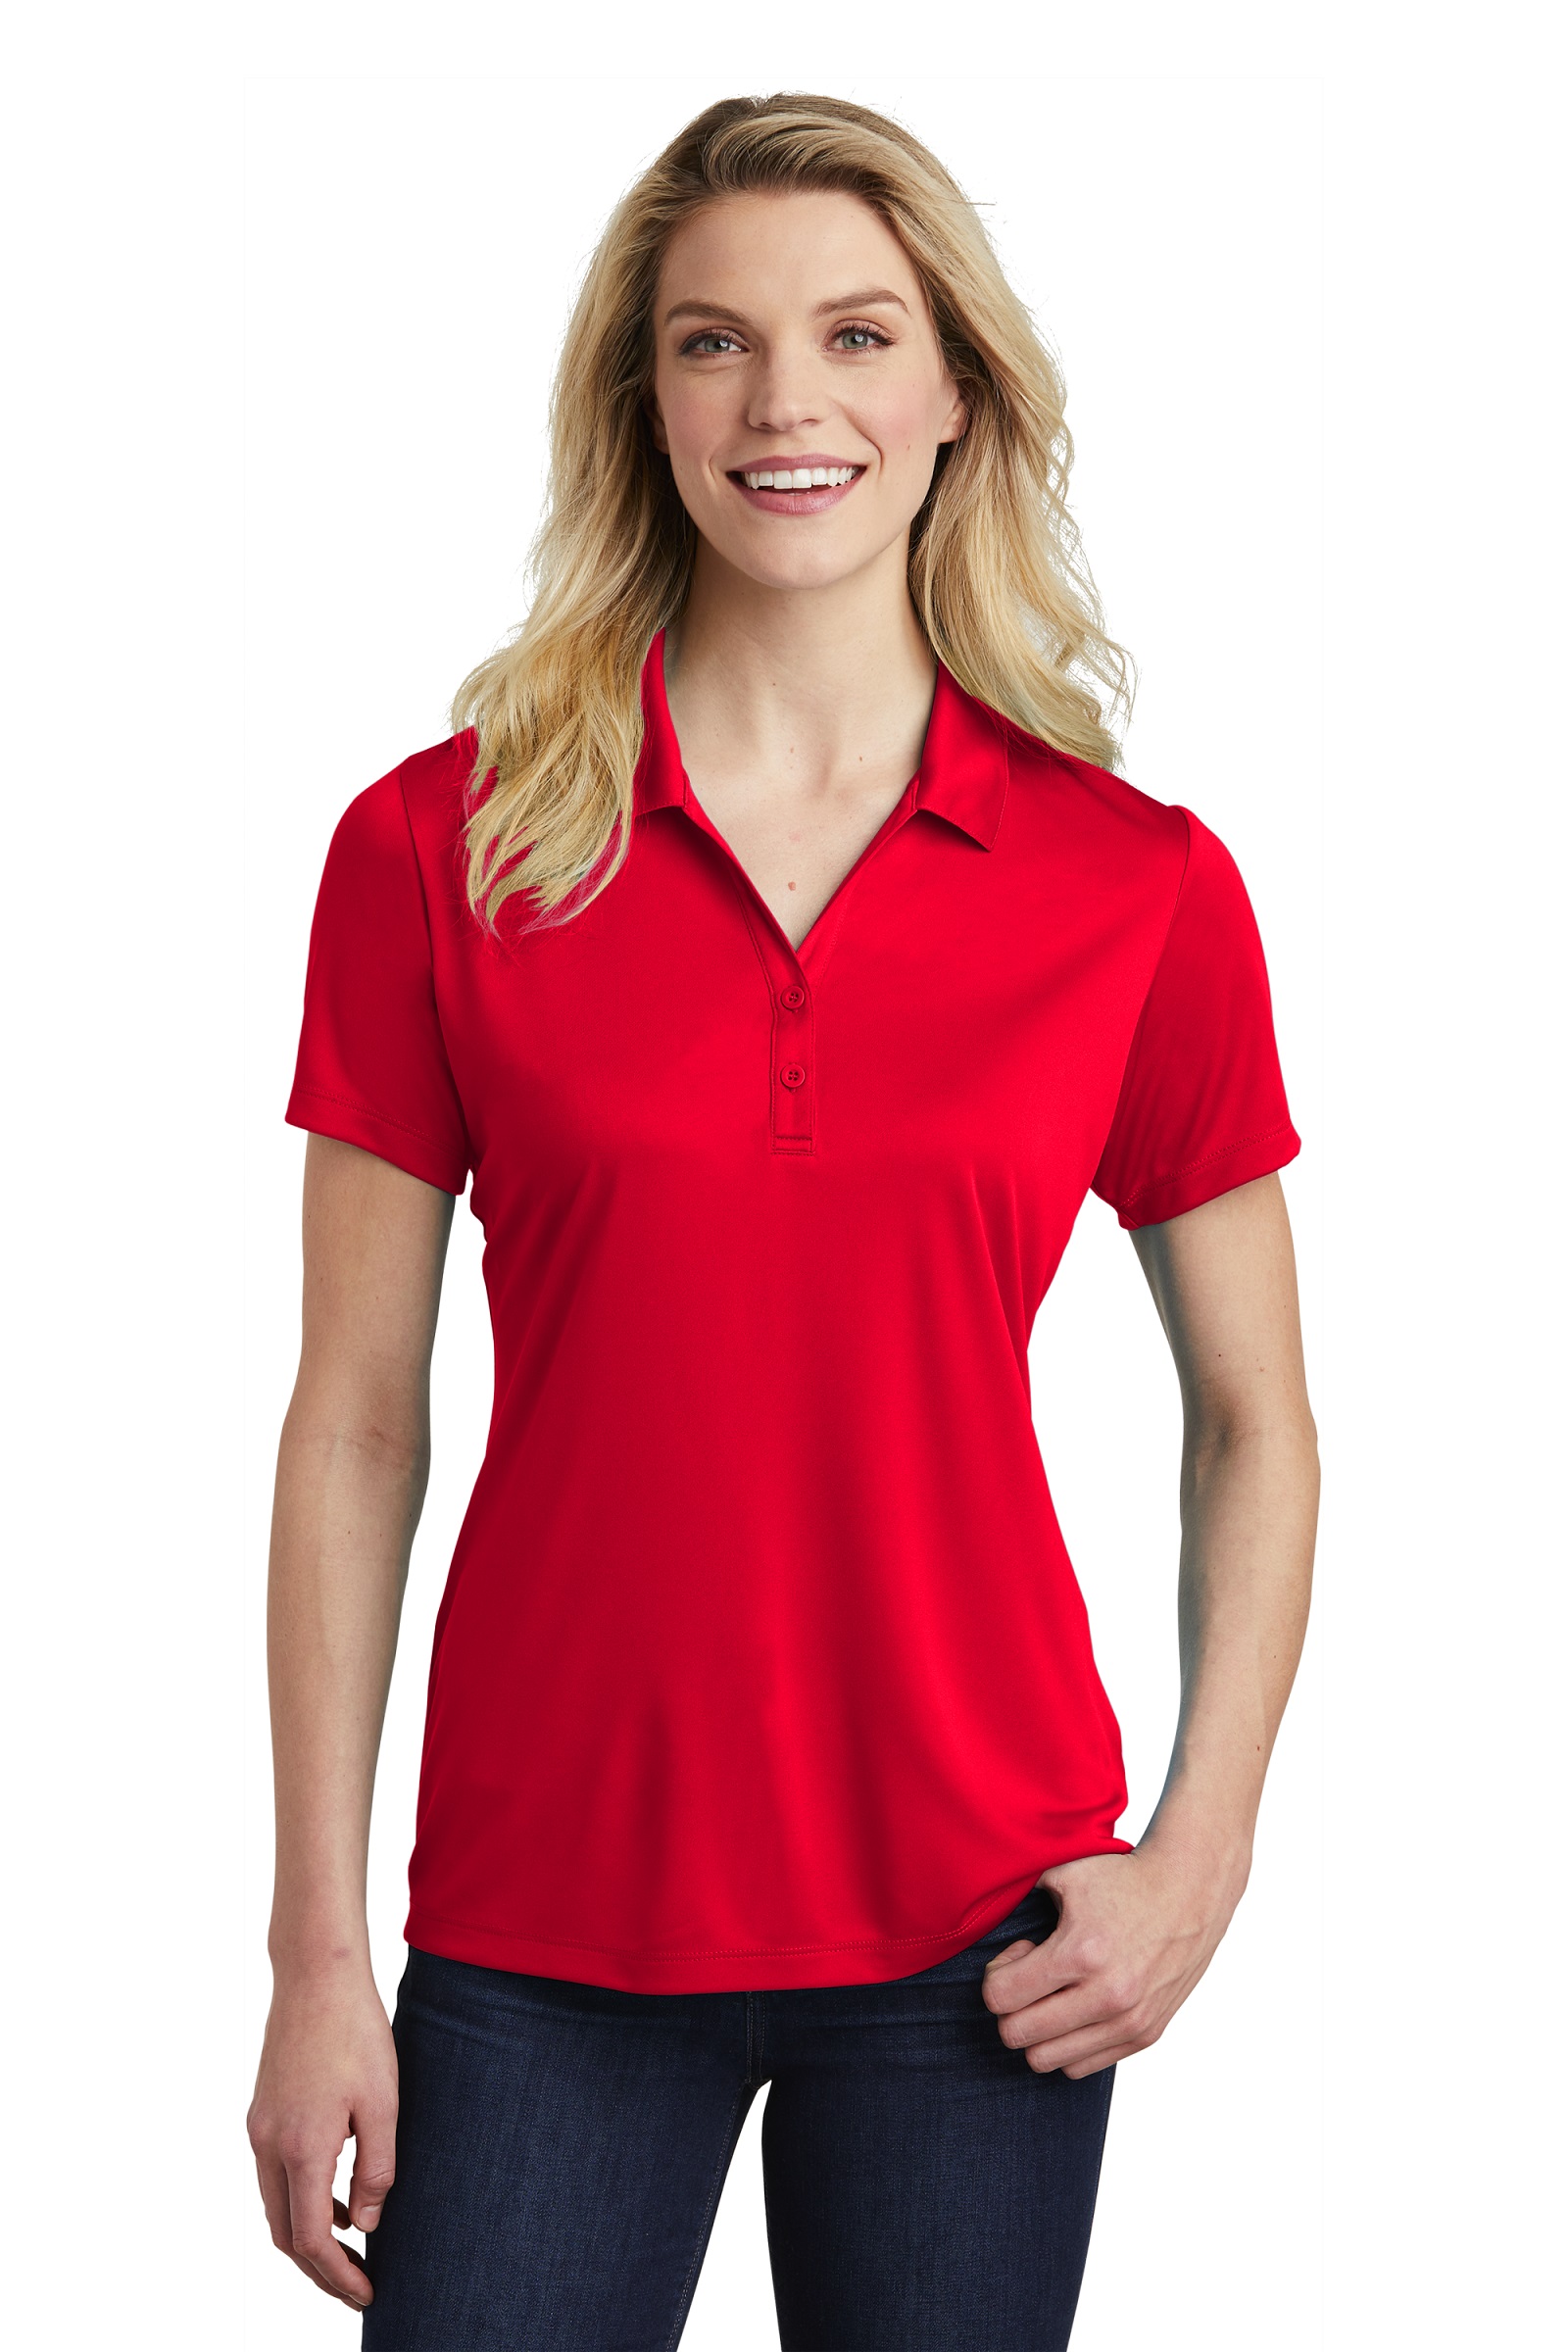 Sport-Tek Embroidered Women's PosiCharge Competitor Polo